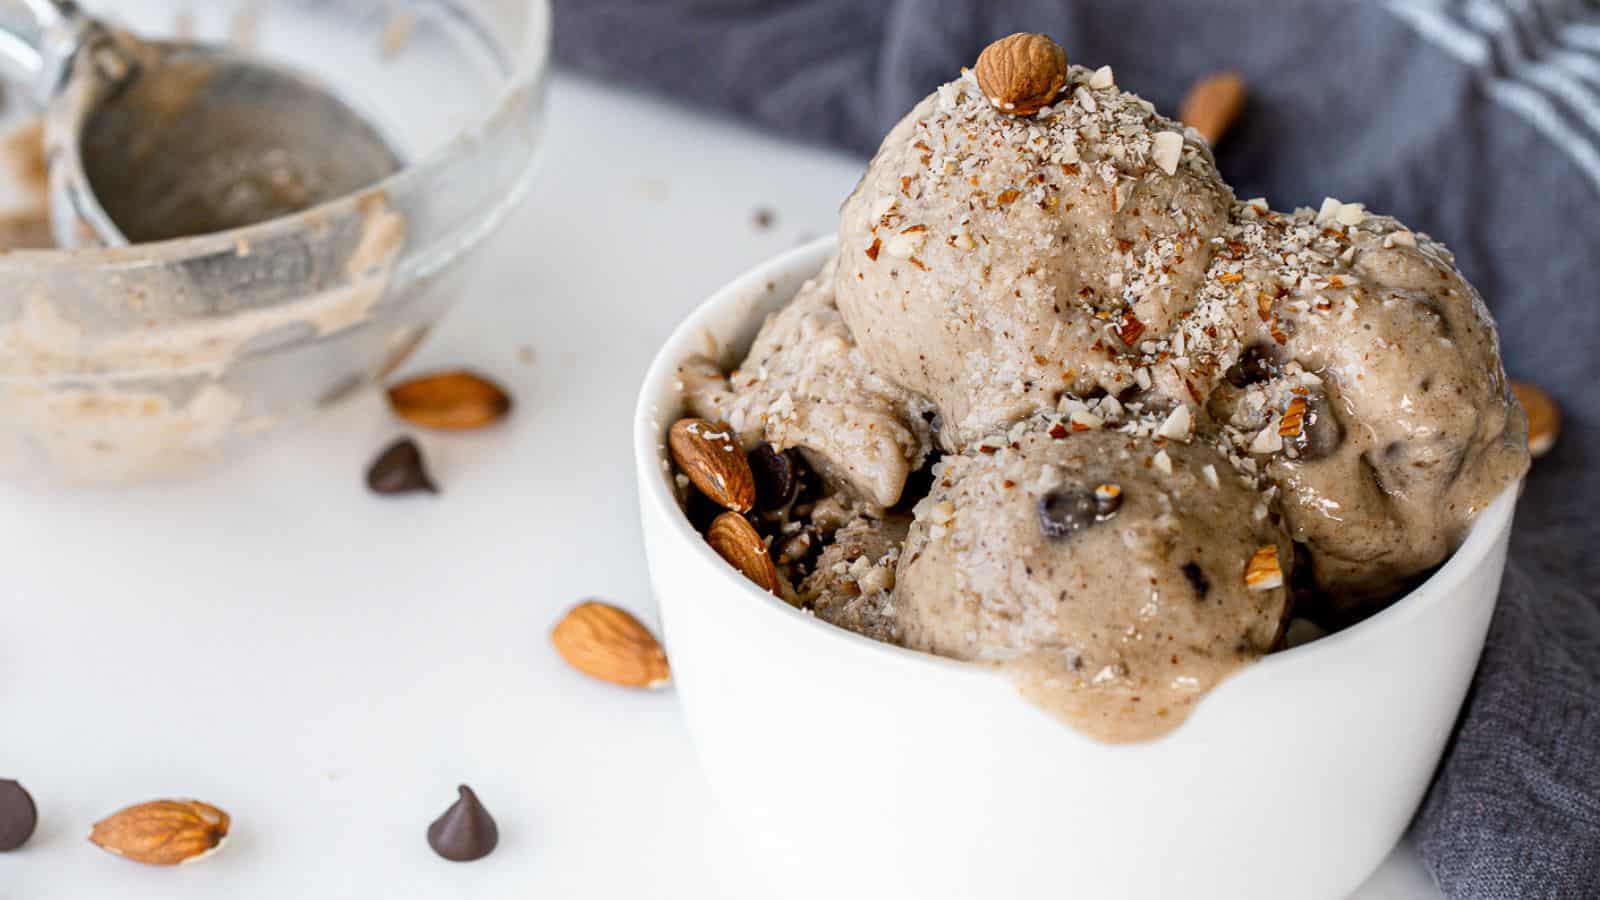 <p>With just a few ingredients, this almond milk banana ice cream is a dream come true for anyone looking for a dairy-free dessert option. It’s creamy, sweet, and utterly satisfying, proving that you don’t need traditional ice cream to indulge your sweet tooth. The blend of bananas and almond milk creates a treat so delightful, you’ll forget it’s not “real” ice cream.<br><strong>Get the Recipe: </strong><a href="https://twocityvegans.com/banana-almond-milk-ice-cream/?utm_source=msn&utm_medium=page&utm_campaign=msn">Almond Milk Banana Ice Cream</a></p>